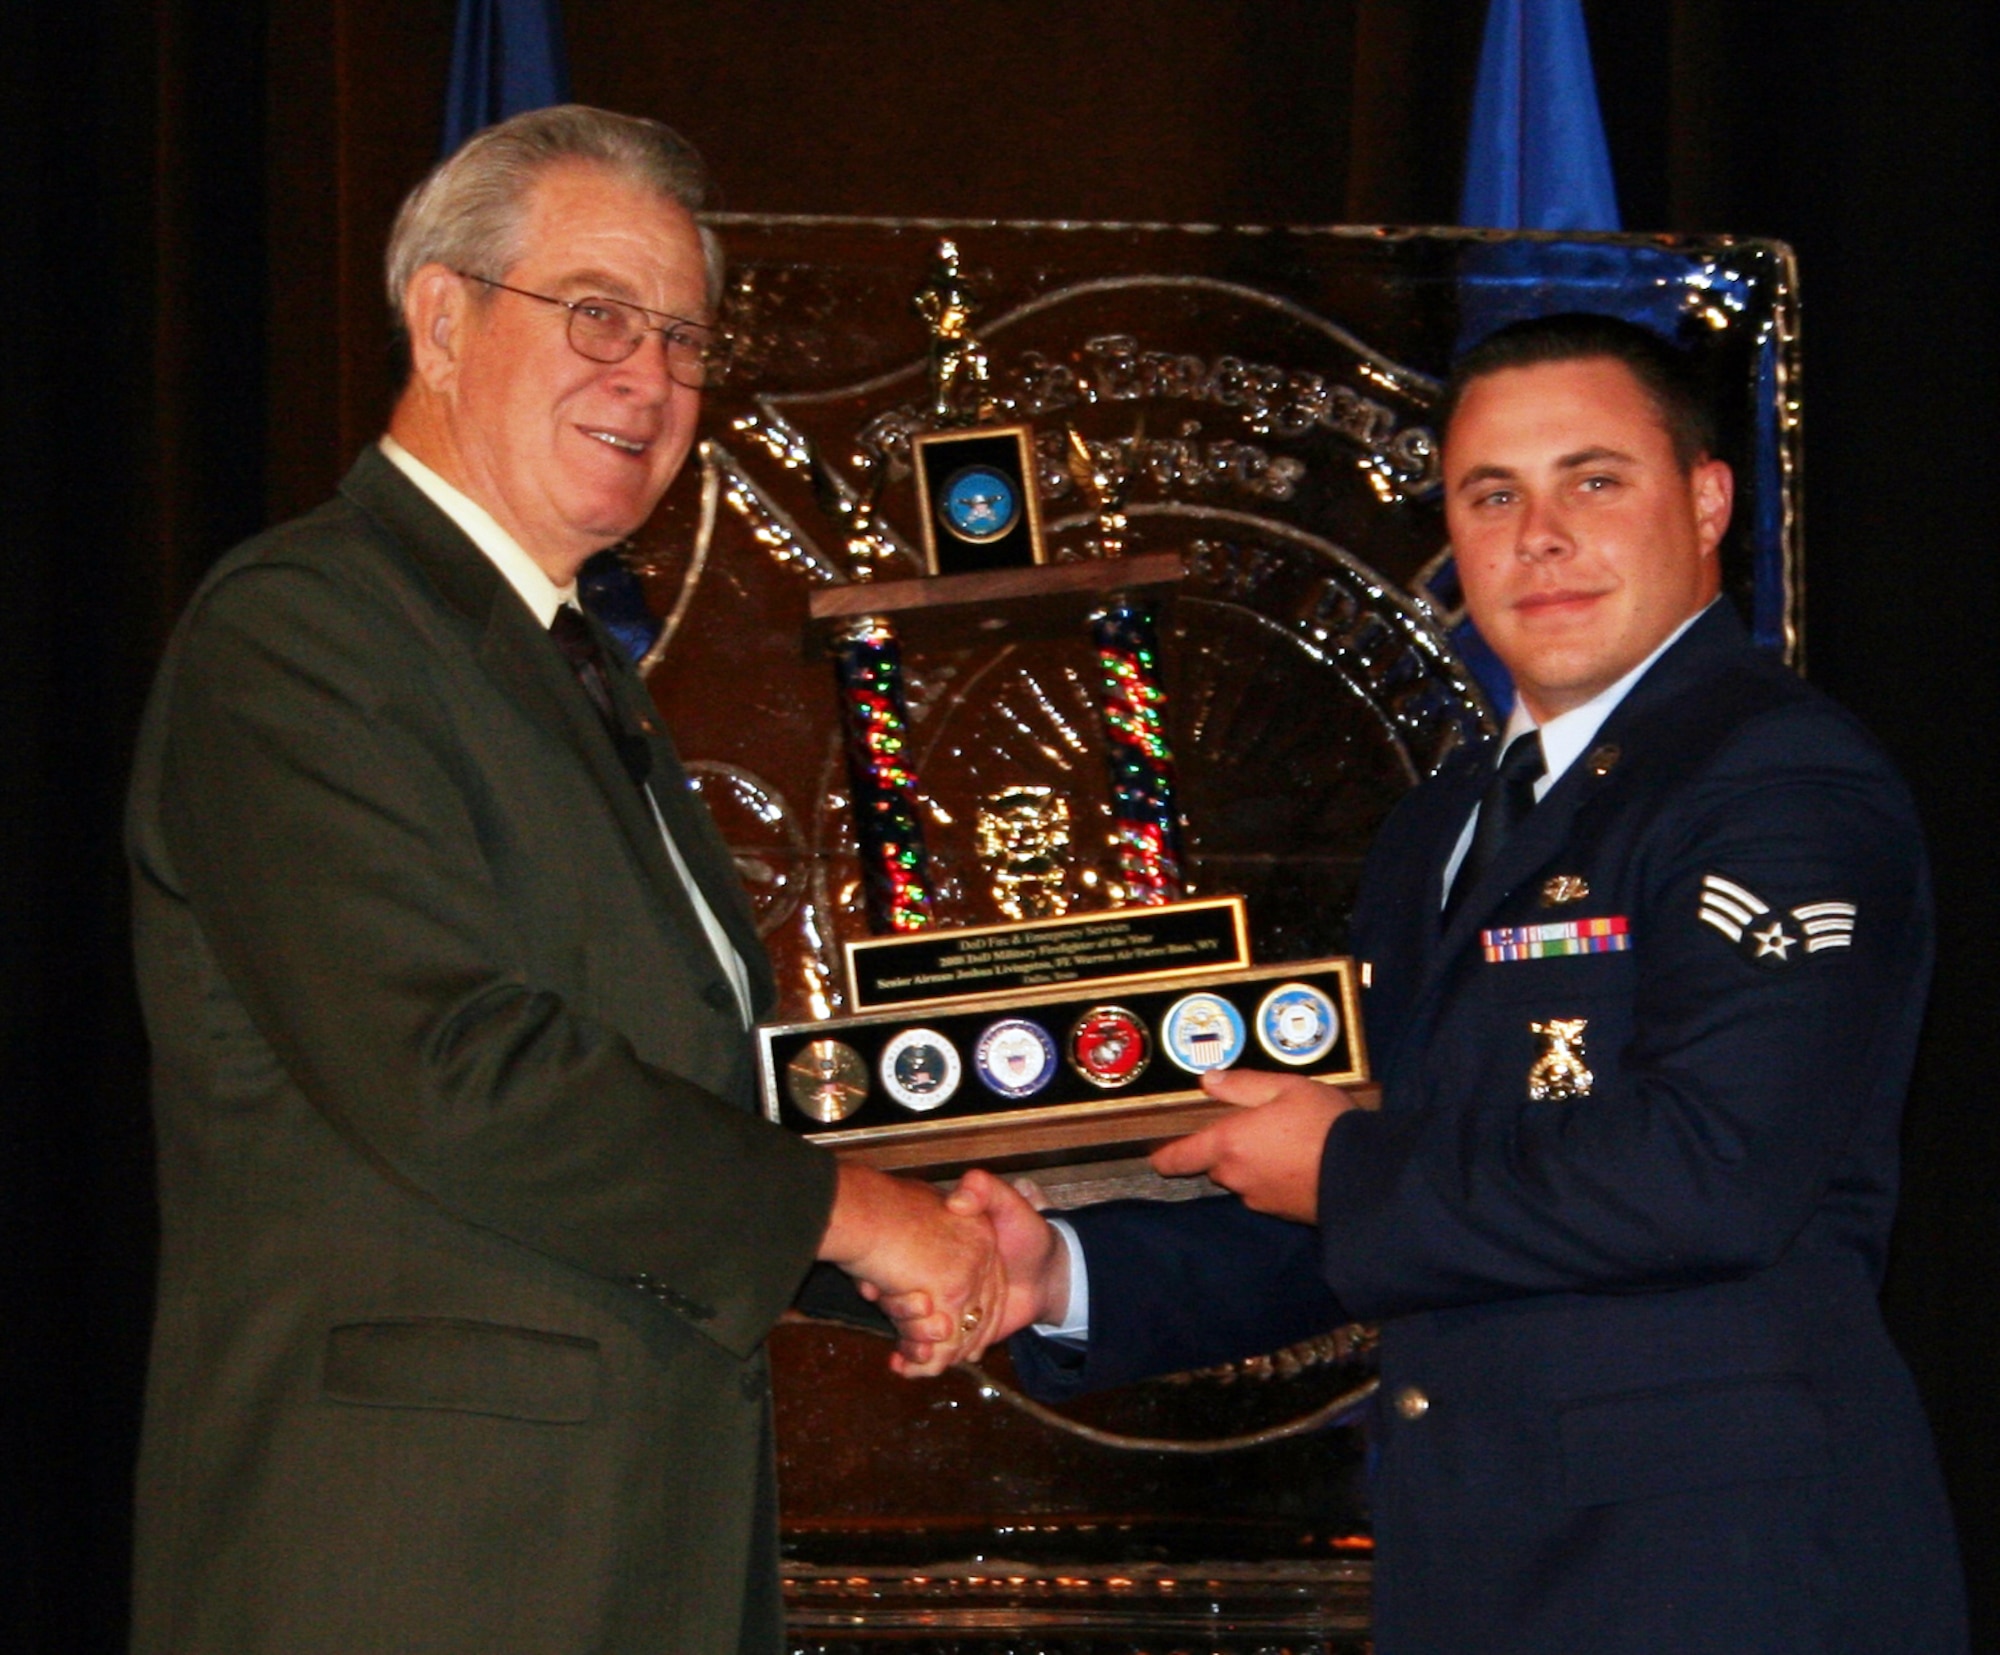 Senior Airman Joshua Livingston, 90th Civil Engineer Squadron, accepts his DoD Firefighter of the Year award from Bill Killen, former president of the International Assoiciation of Fire Chiefs, during as awards banquet Aug. 28 in Dallas. (Courtesy Photo)